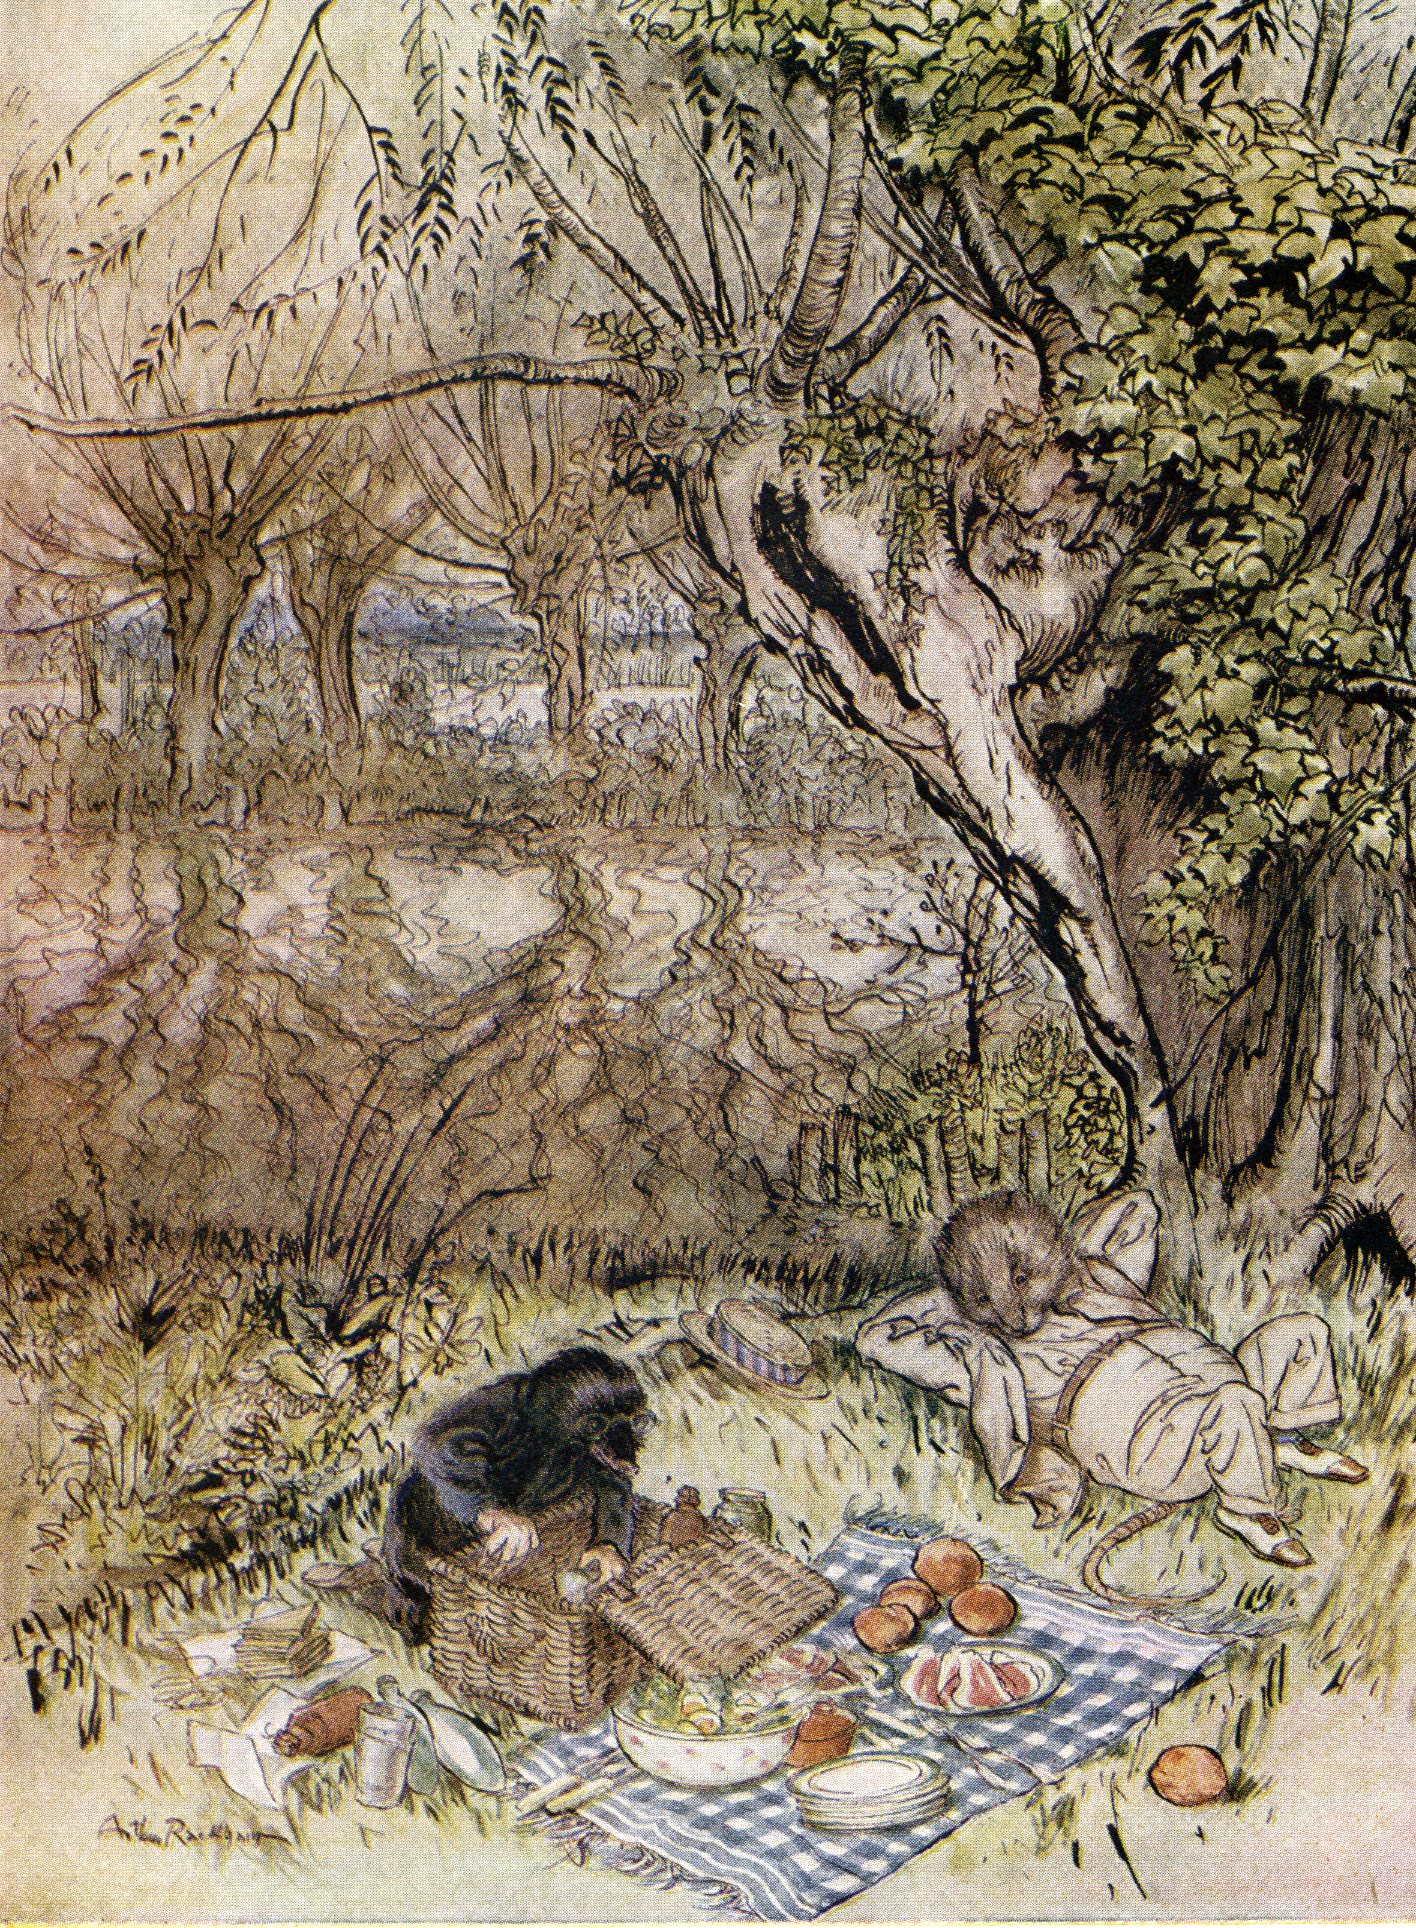 Arthur Rackham’s “The Mole begged as favour to be allowed to unpack” in The Wind in the Willows  (1931)